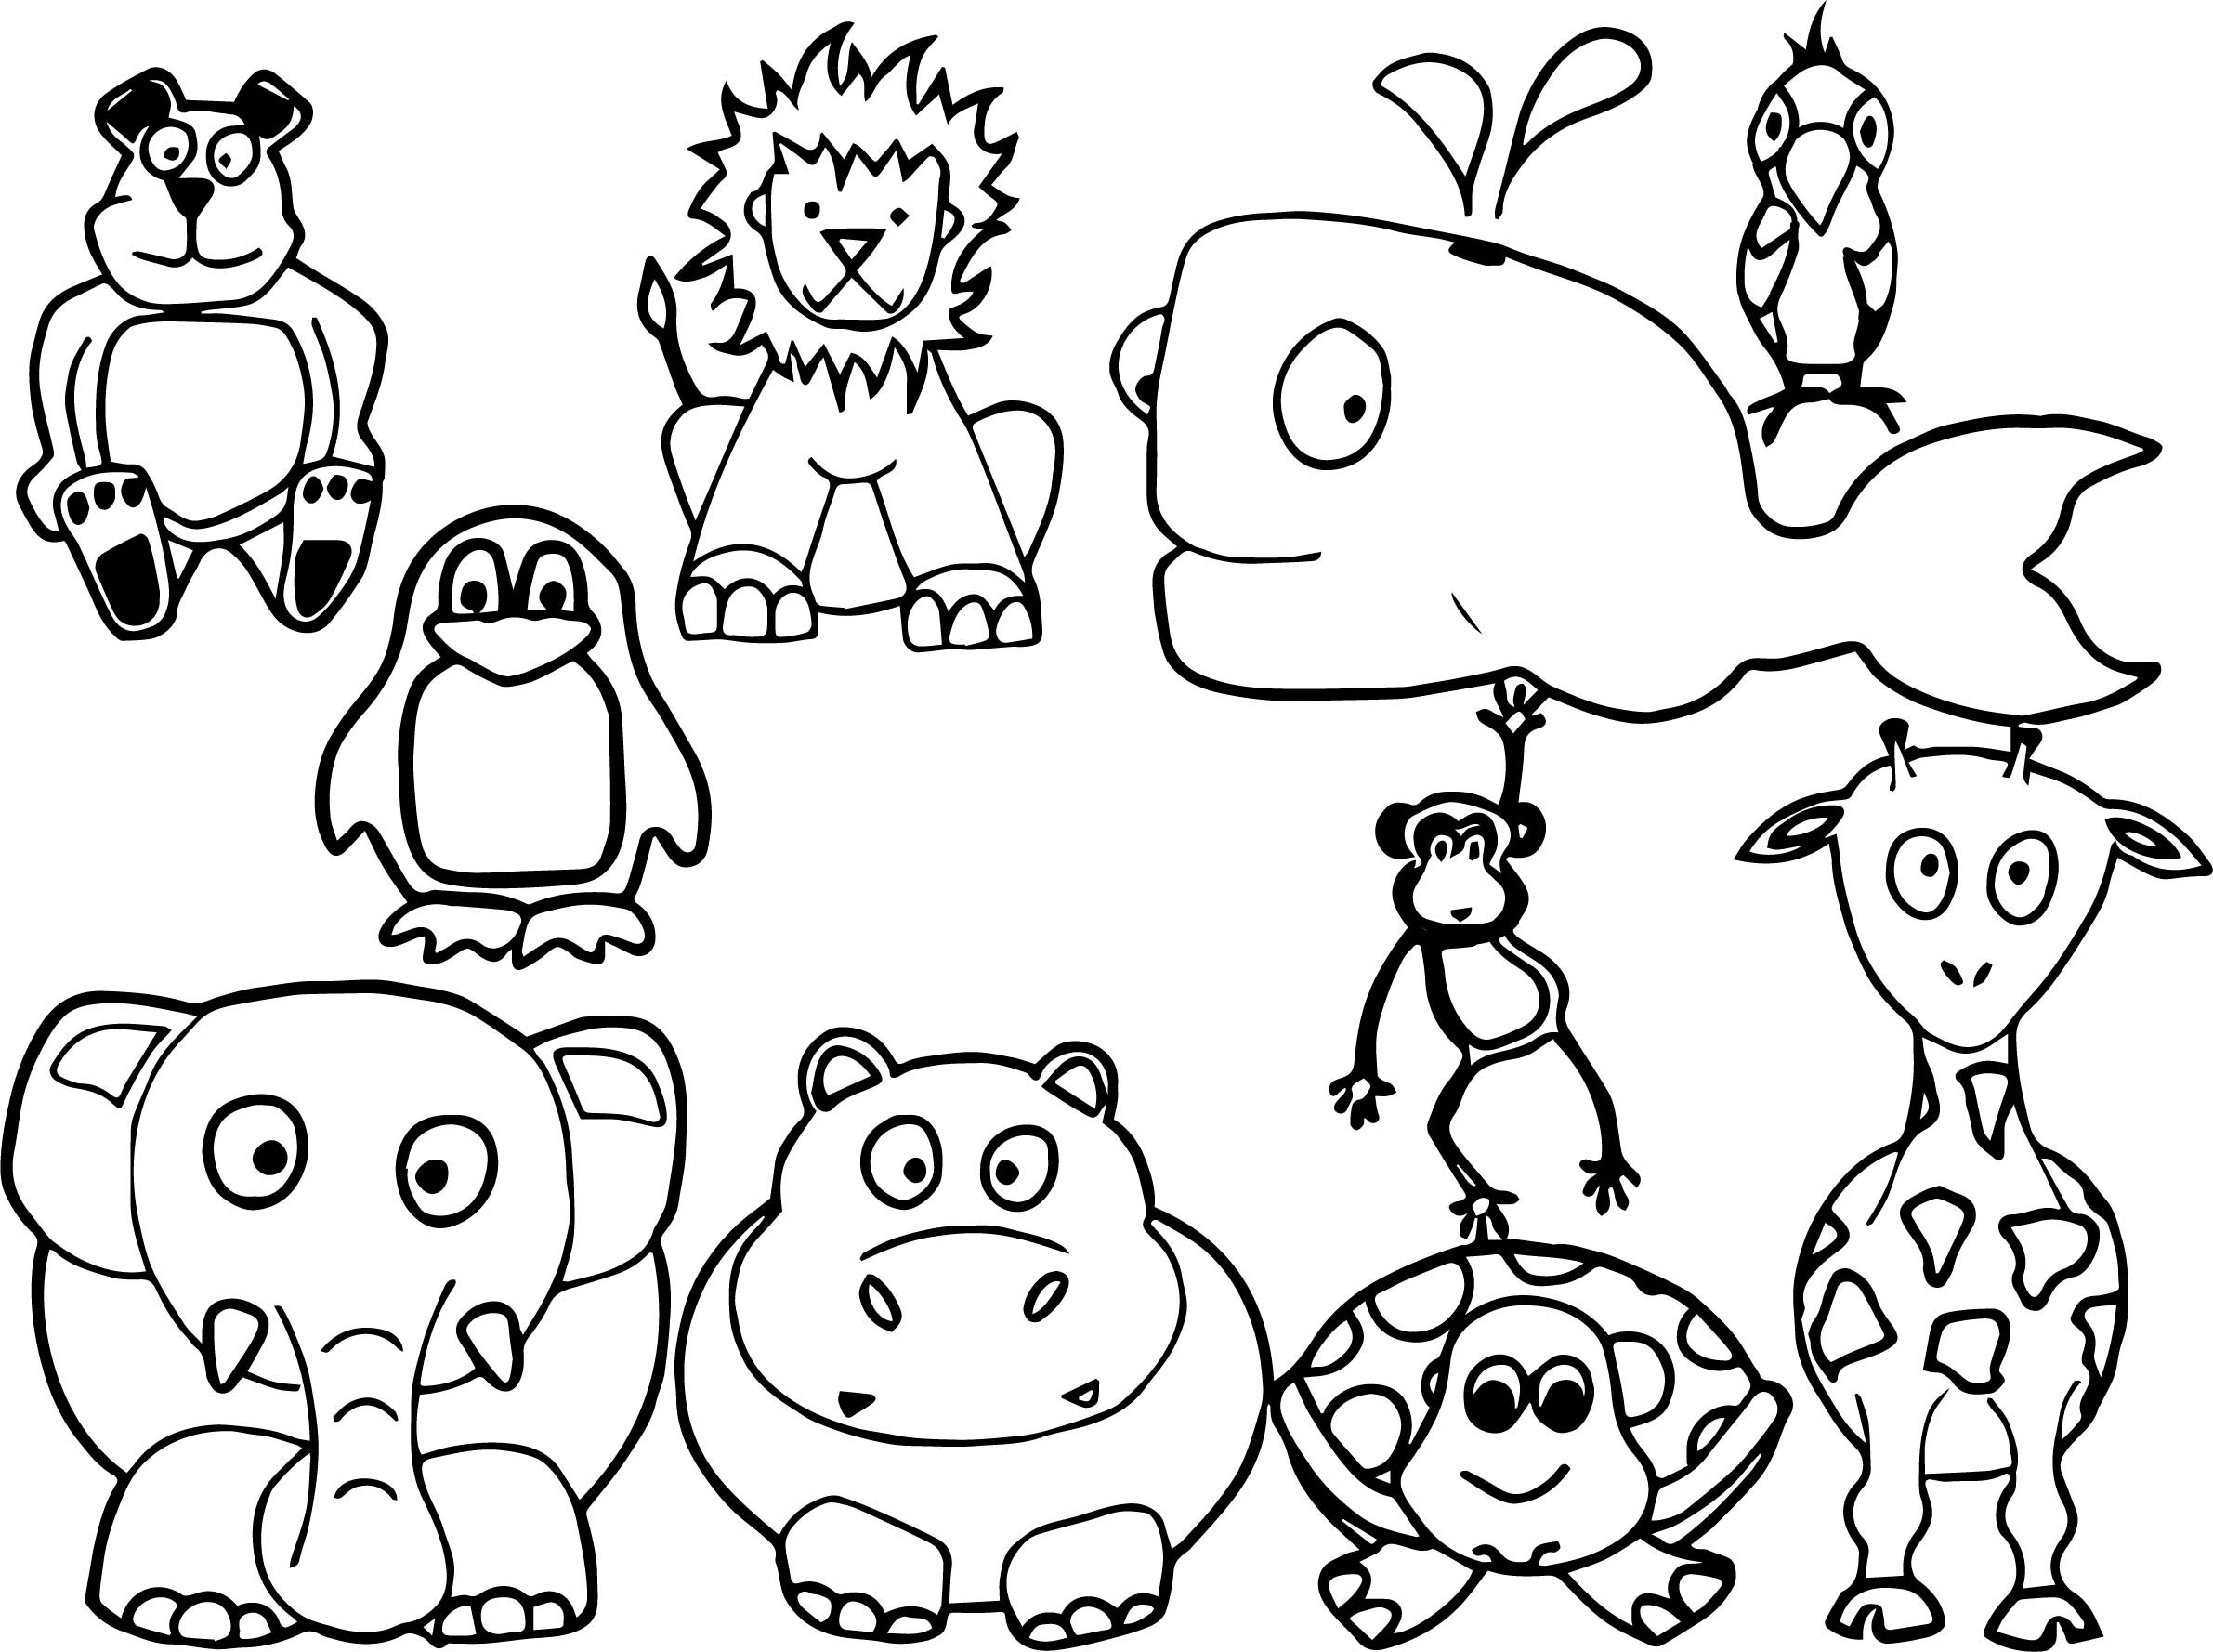 Baby Farm Animals Coloring Pages
 All Baby Farm Animal Coloring Page